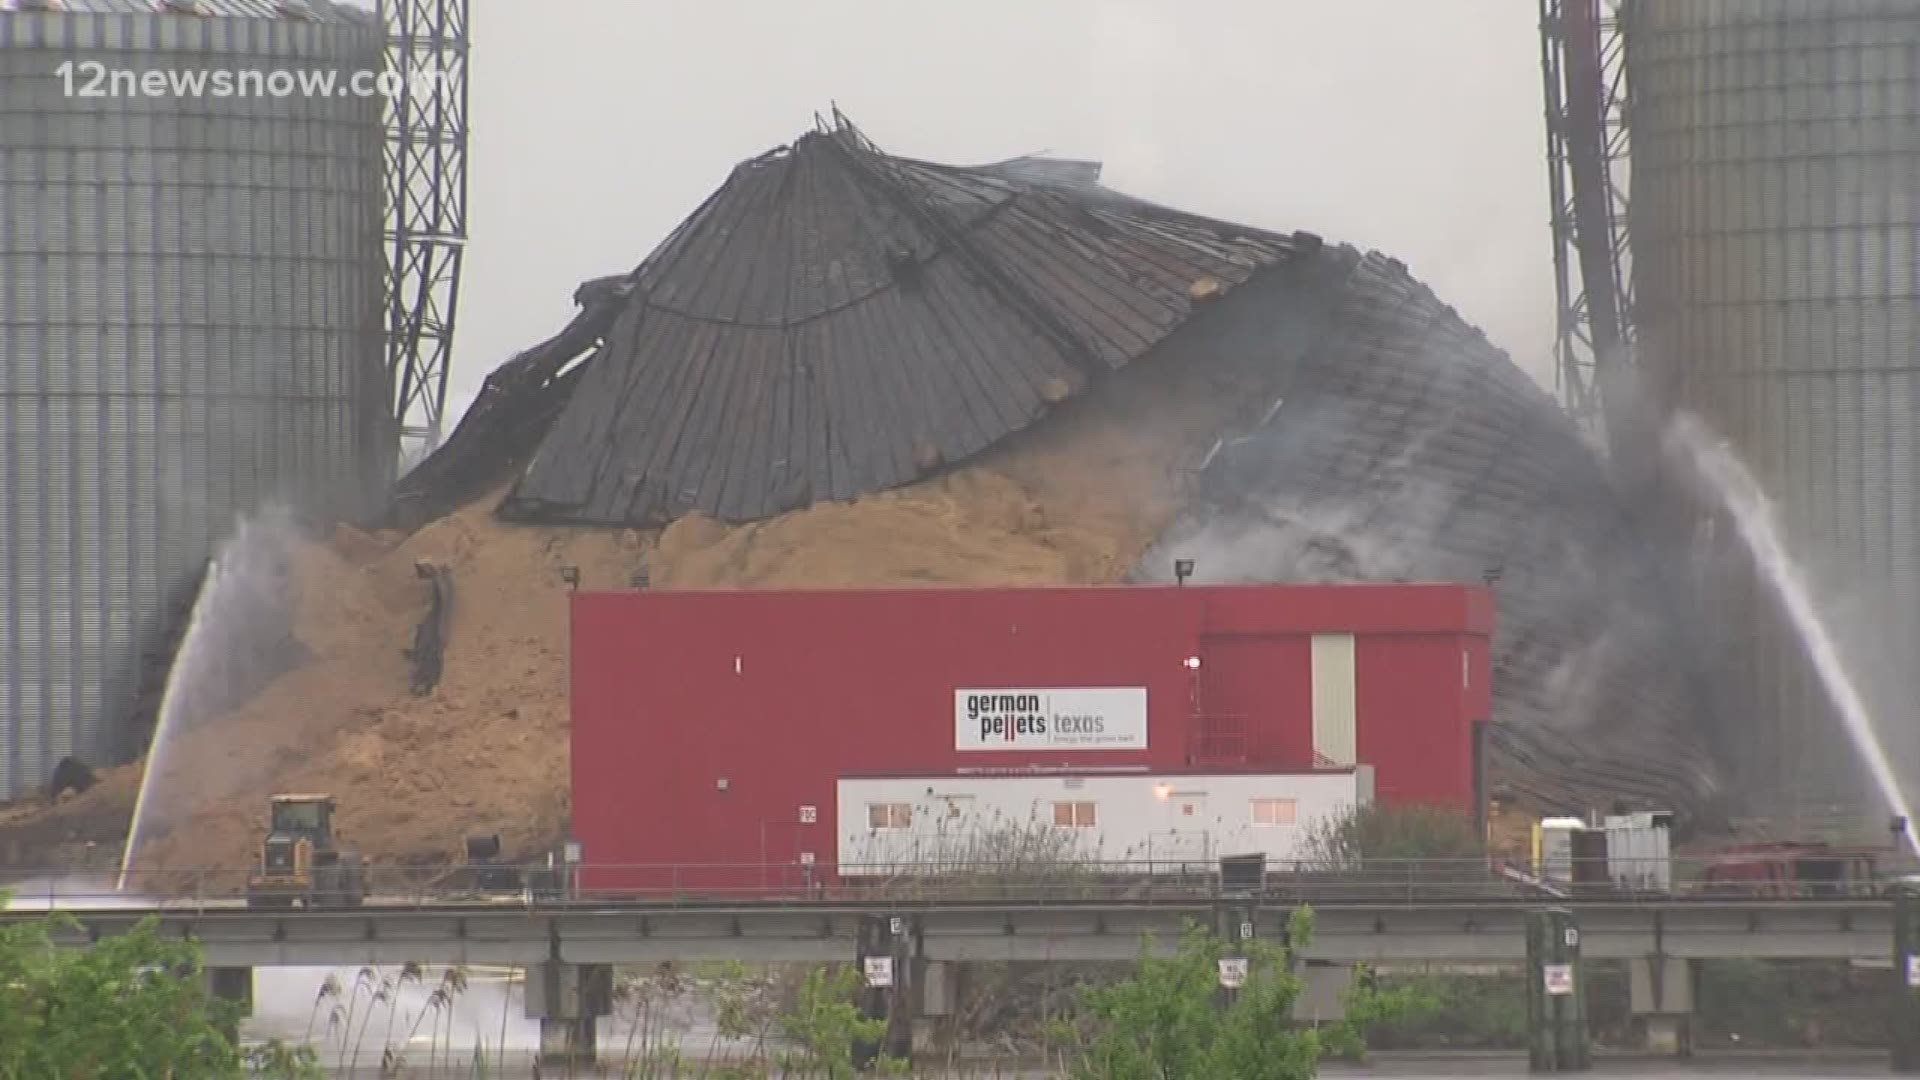 Port Arthur German Pellets To Pay 12 000 In Fines After Fire 12newsnow Com